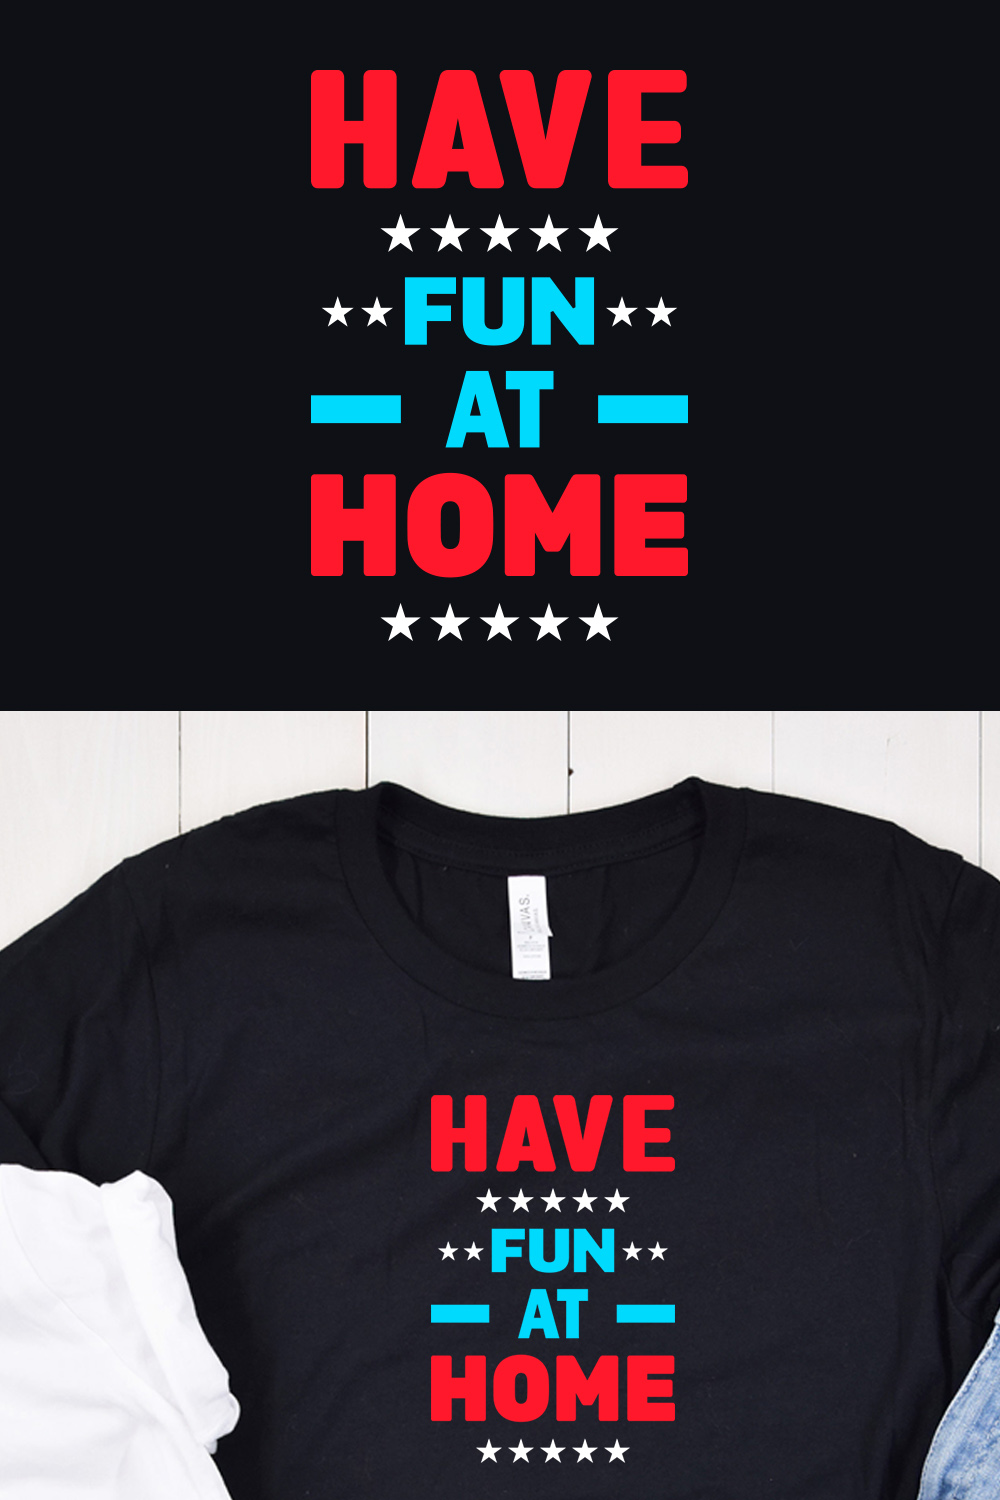 Have Fun at Home Typography T-Shirt Design Pinterest Collage image.